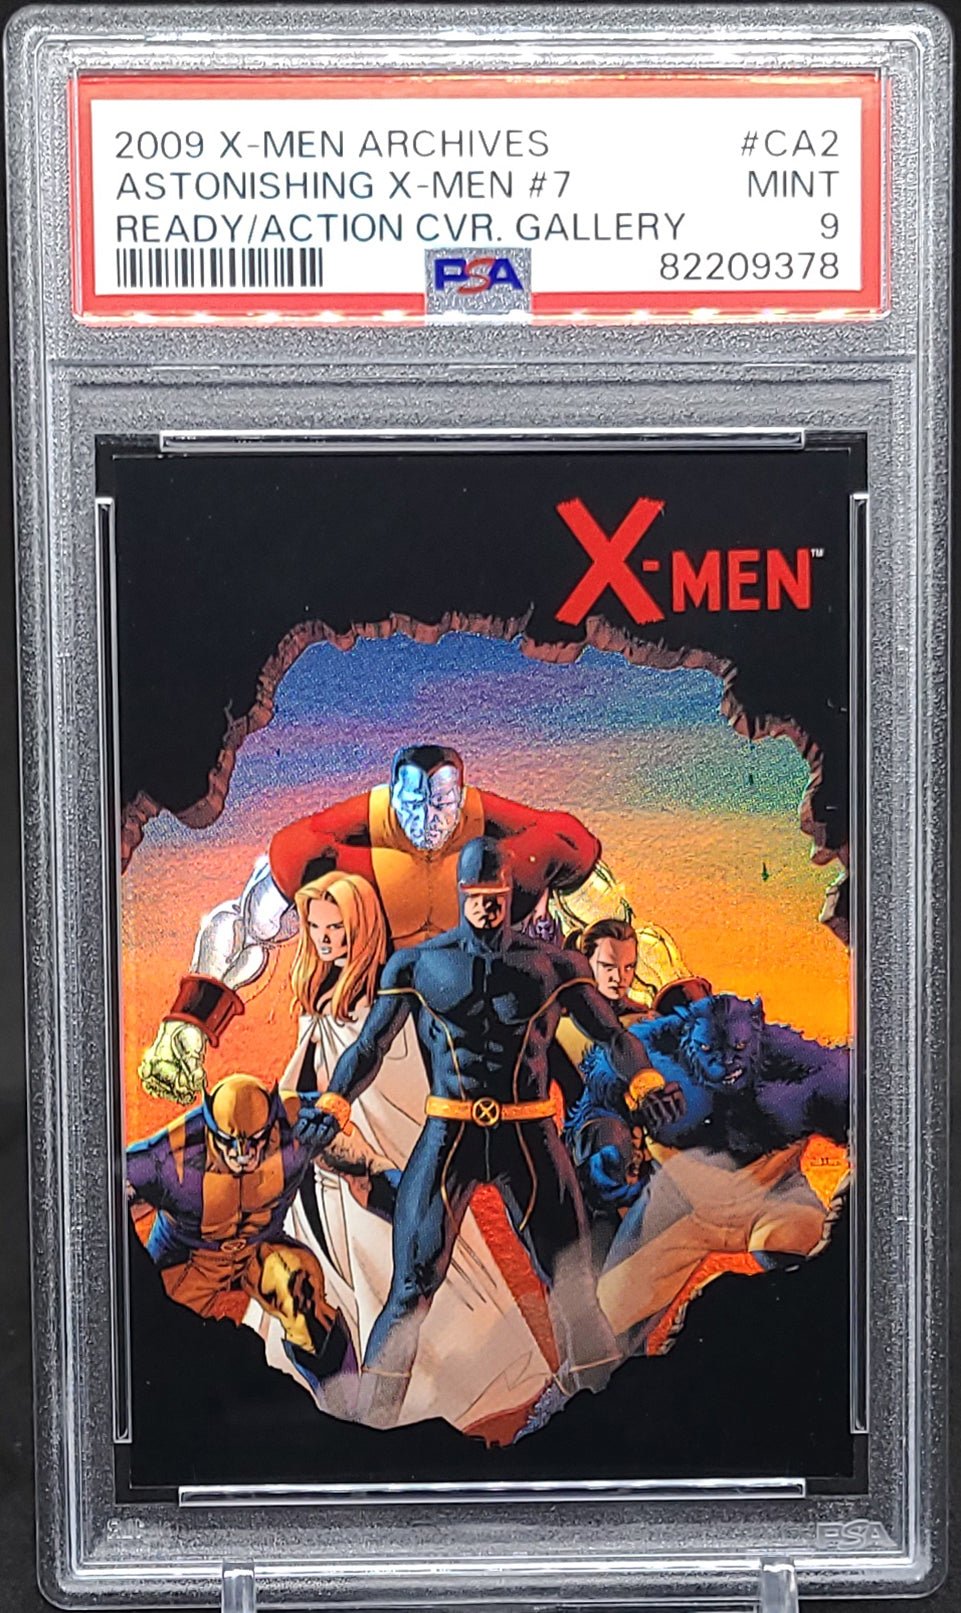 ASTONISHING X-MEN #7 PSA 9 2009 Rittenhouse Marvel X-Men Archives Ready for Action Cover Gallery CA2 (Beast Colossus Cyclops Emma Frost Rogue Wolverine) Marvel Graded Cards Insert - Hobby Gems